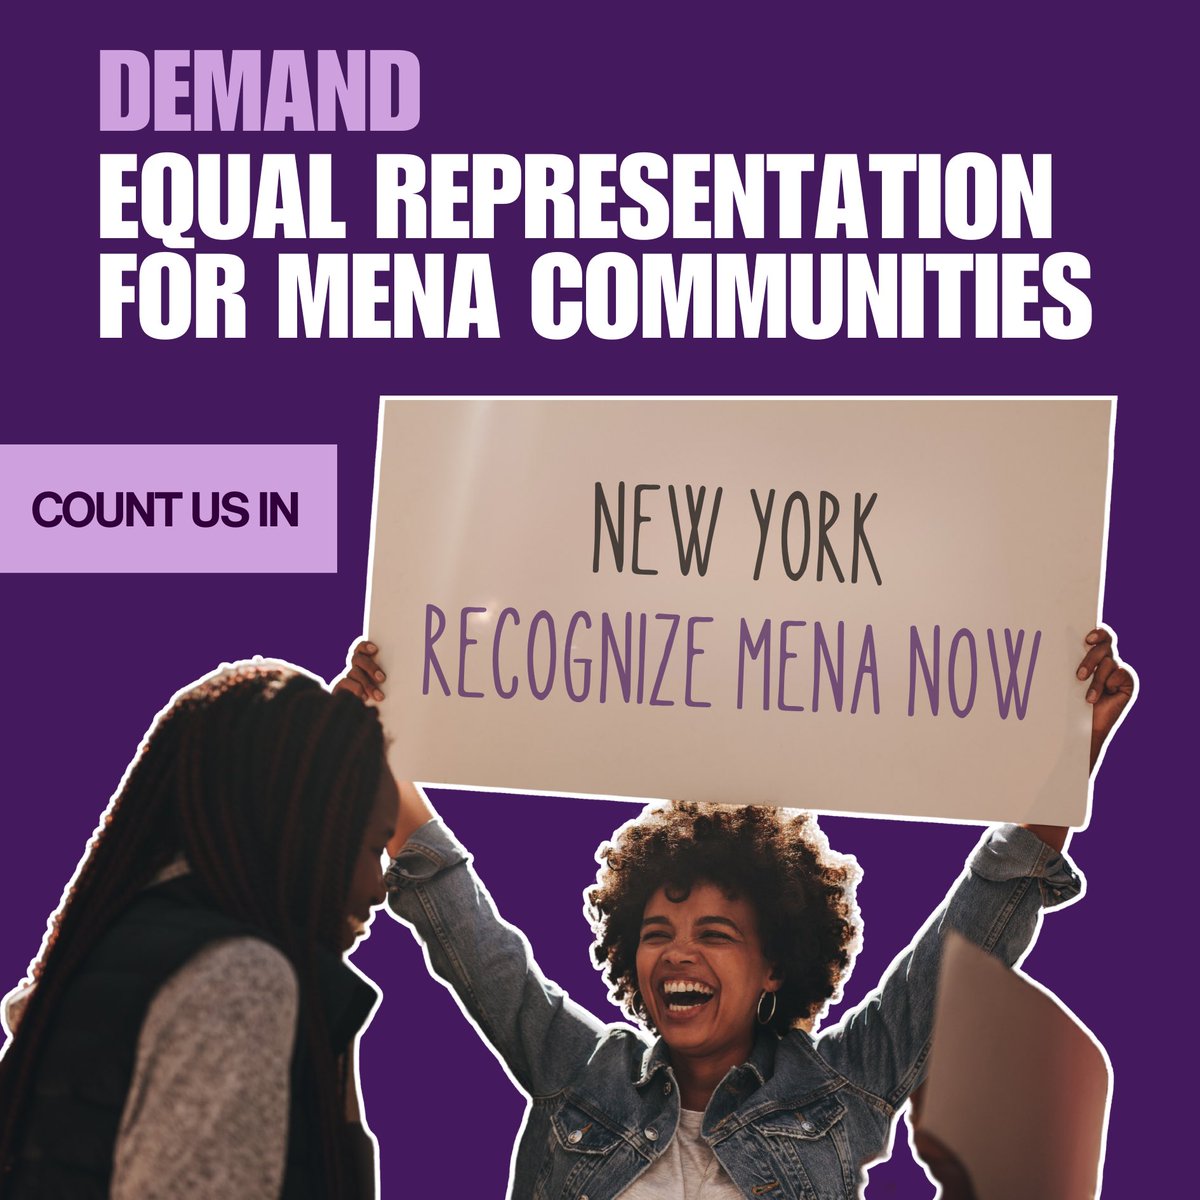 We need data about Middle Eastern & North African communities to be separate from the “White” category. It will help us understand & advocate for them in decision making & resource allocation. Email your reps. Urge them to recognize MENA communities in NY!actionnetwork.org/letters/recogn…